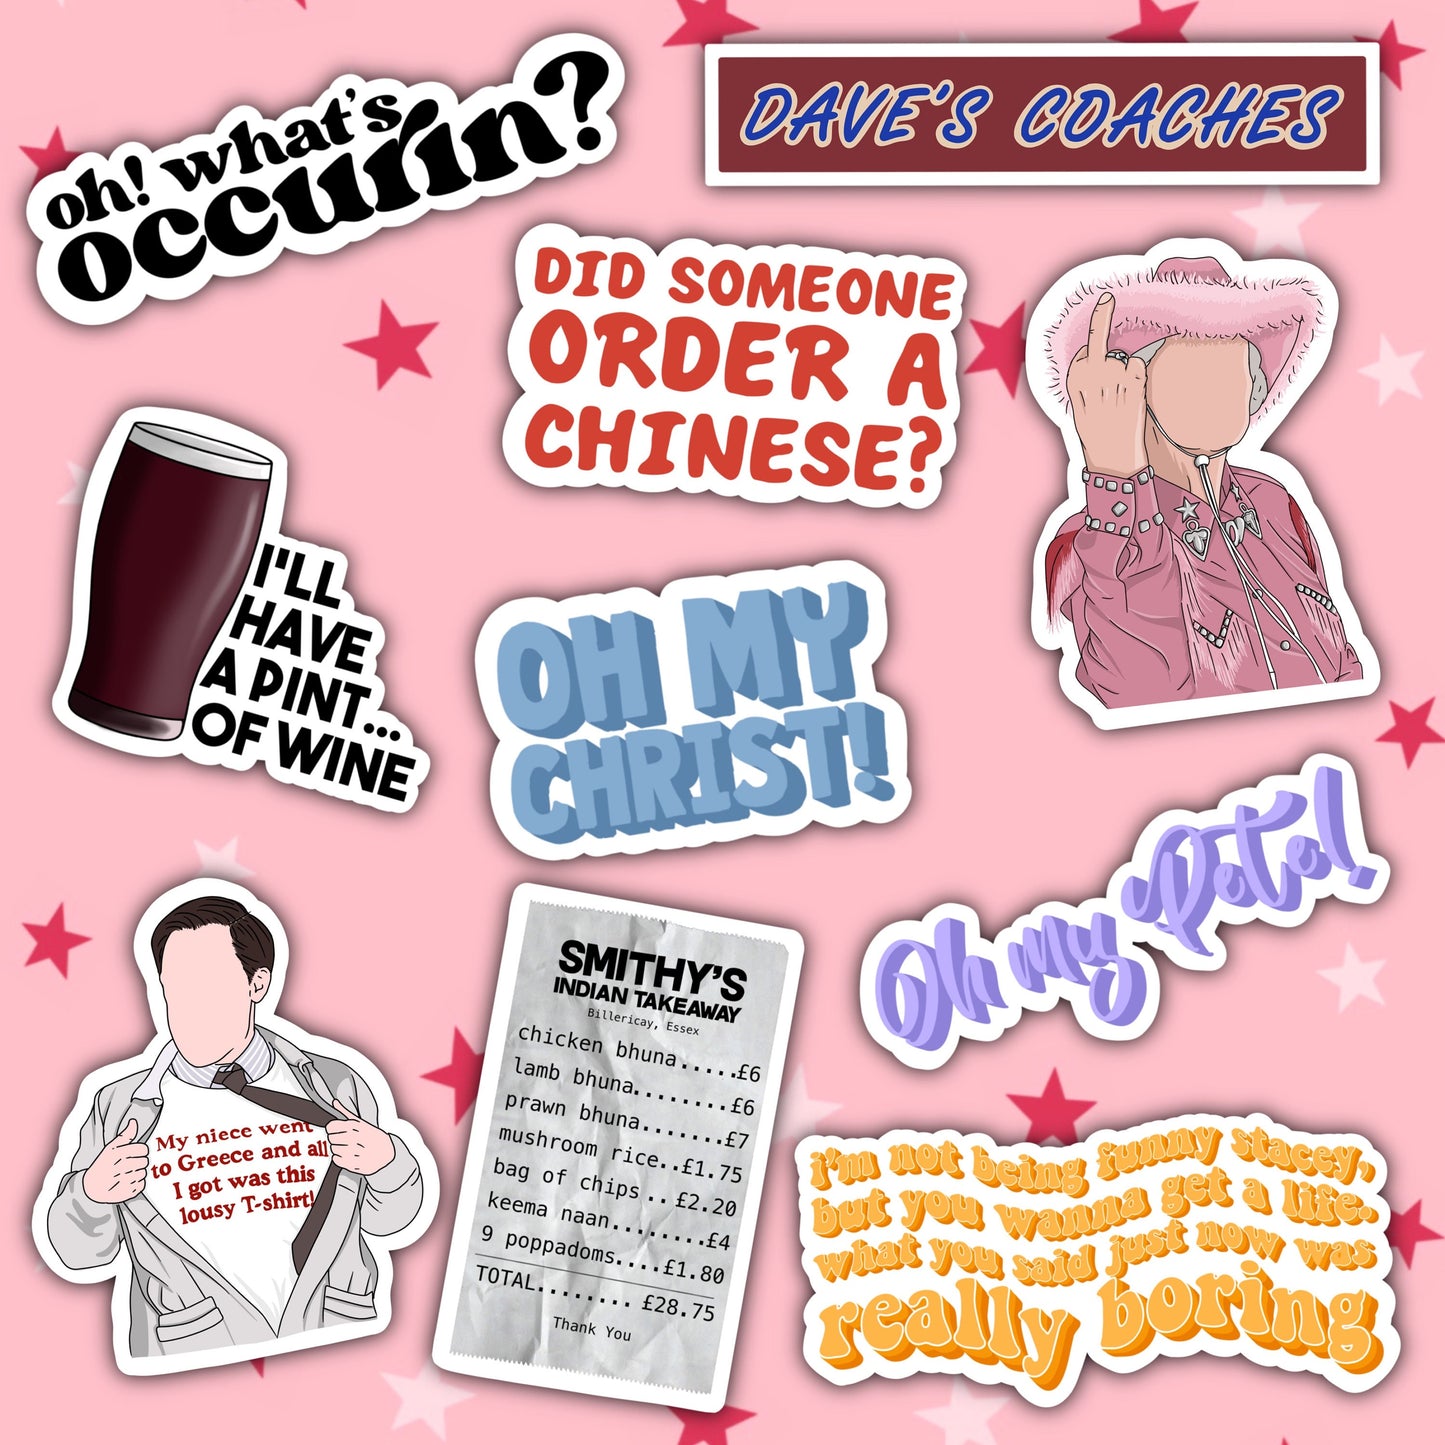 You Wanna Get a Life Stacey | Pam Shipman | Gavin and Stacey Stickers